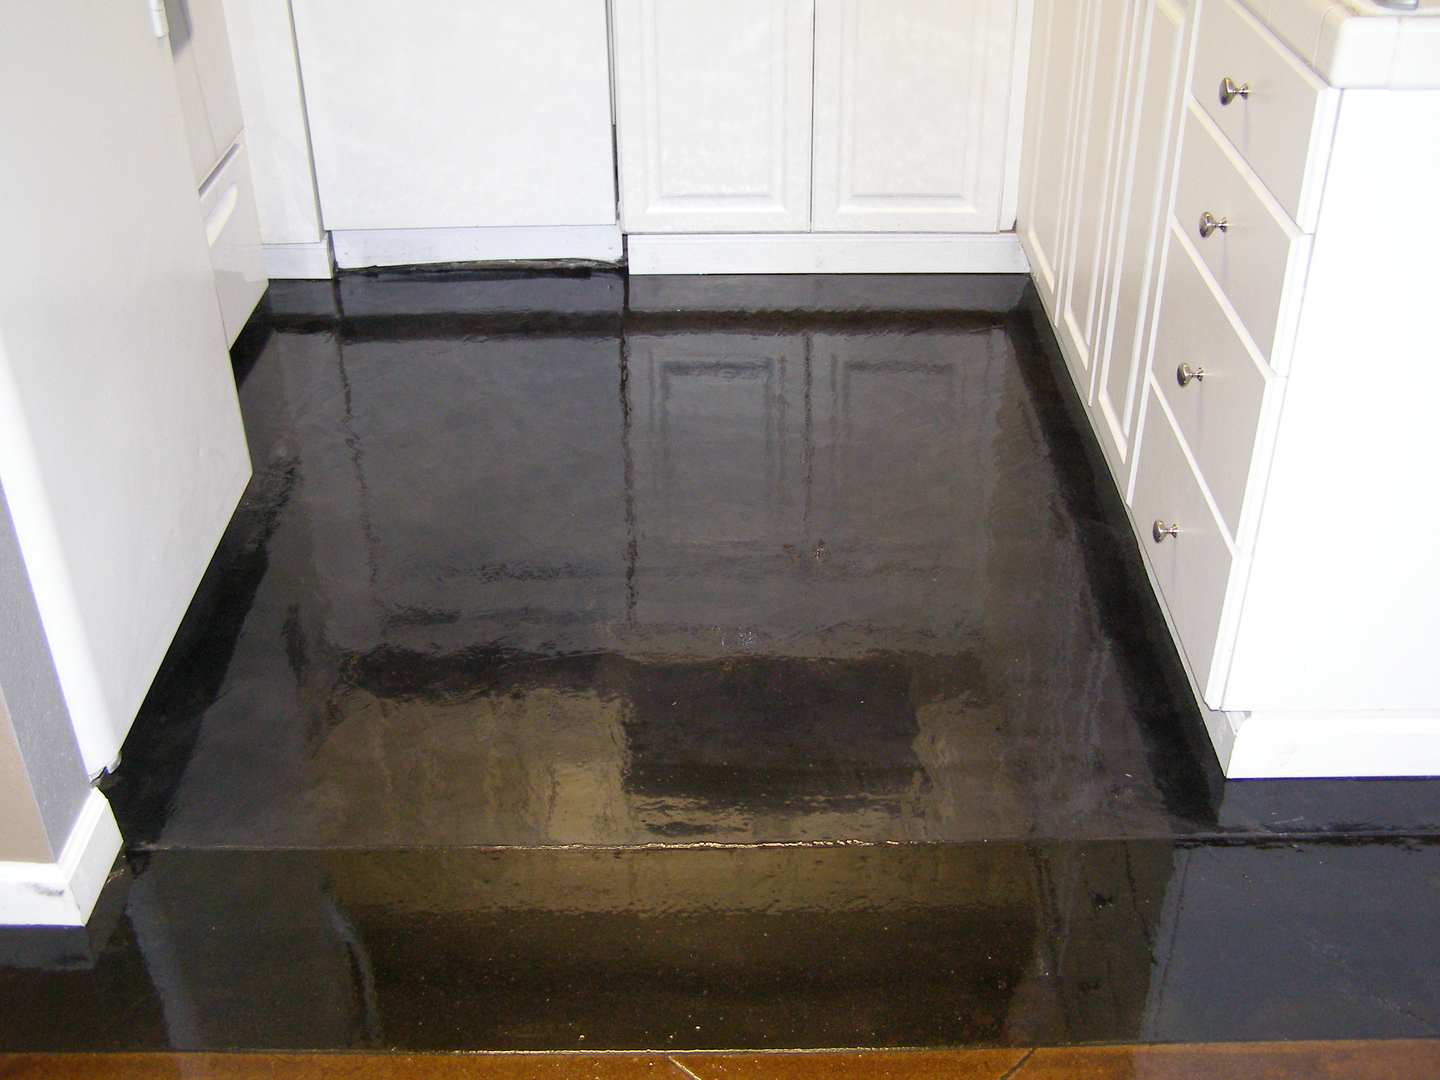 A Glazing Black Reflecting Flooring with white cabinets around